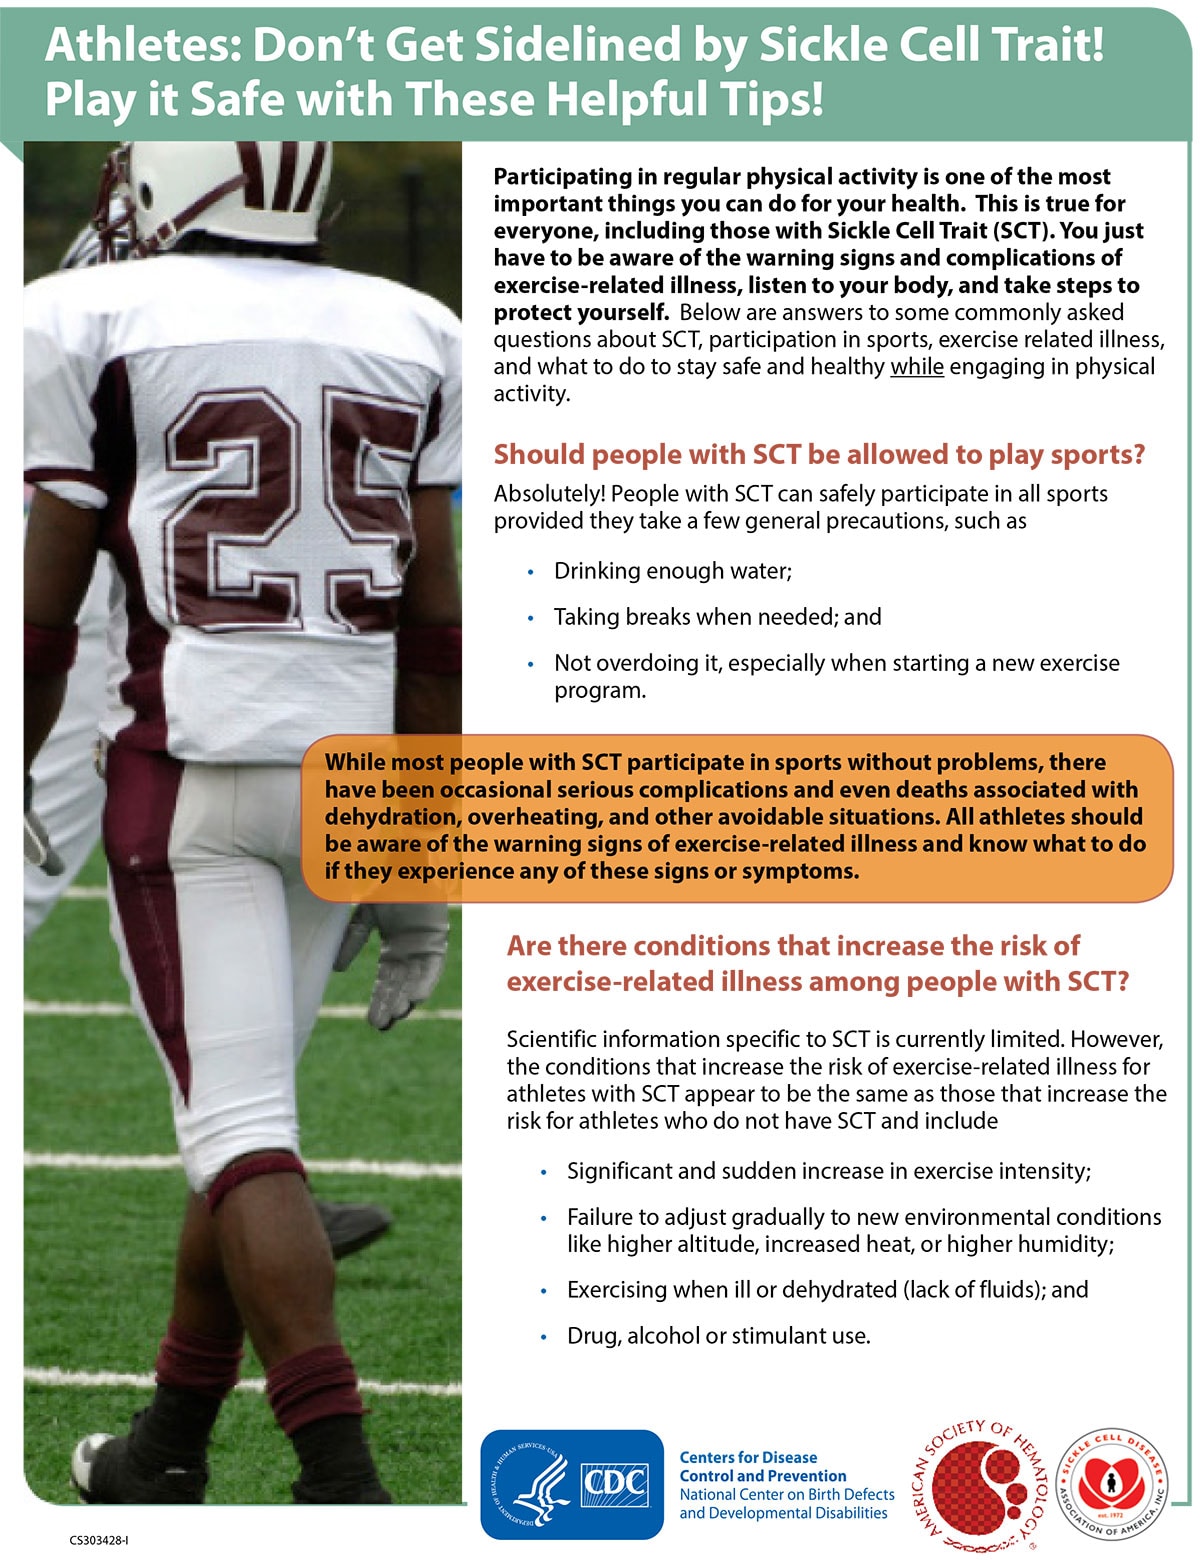 Athletes: Don’t get sidelined by sickle cell trait! Play it safe with these helpful tips! - factsheet thumbnail